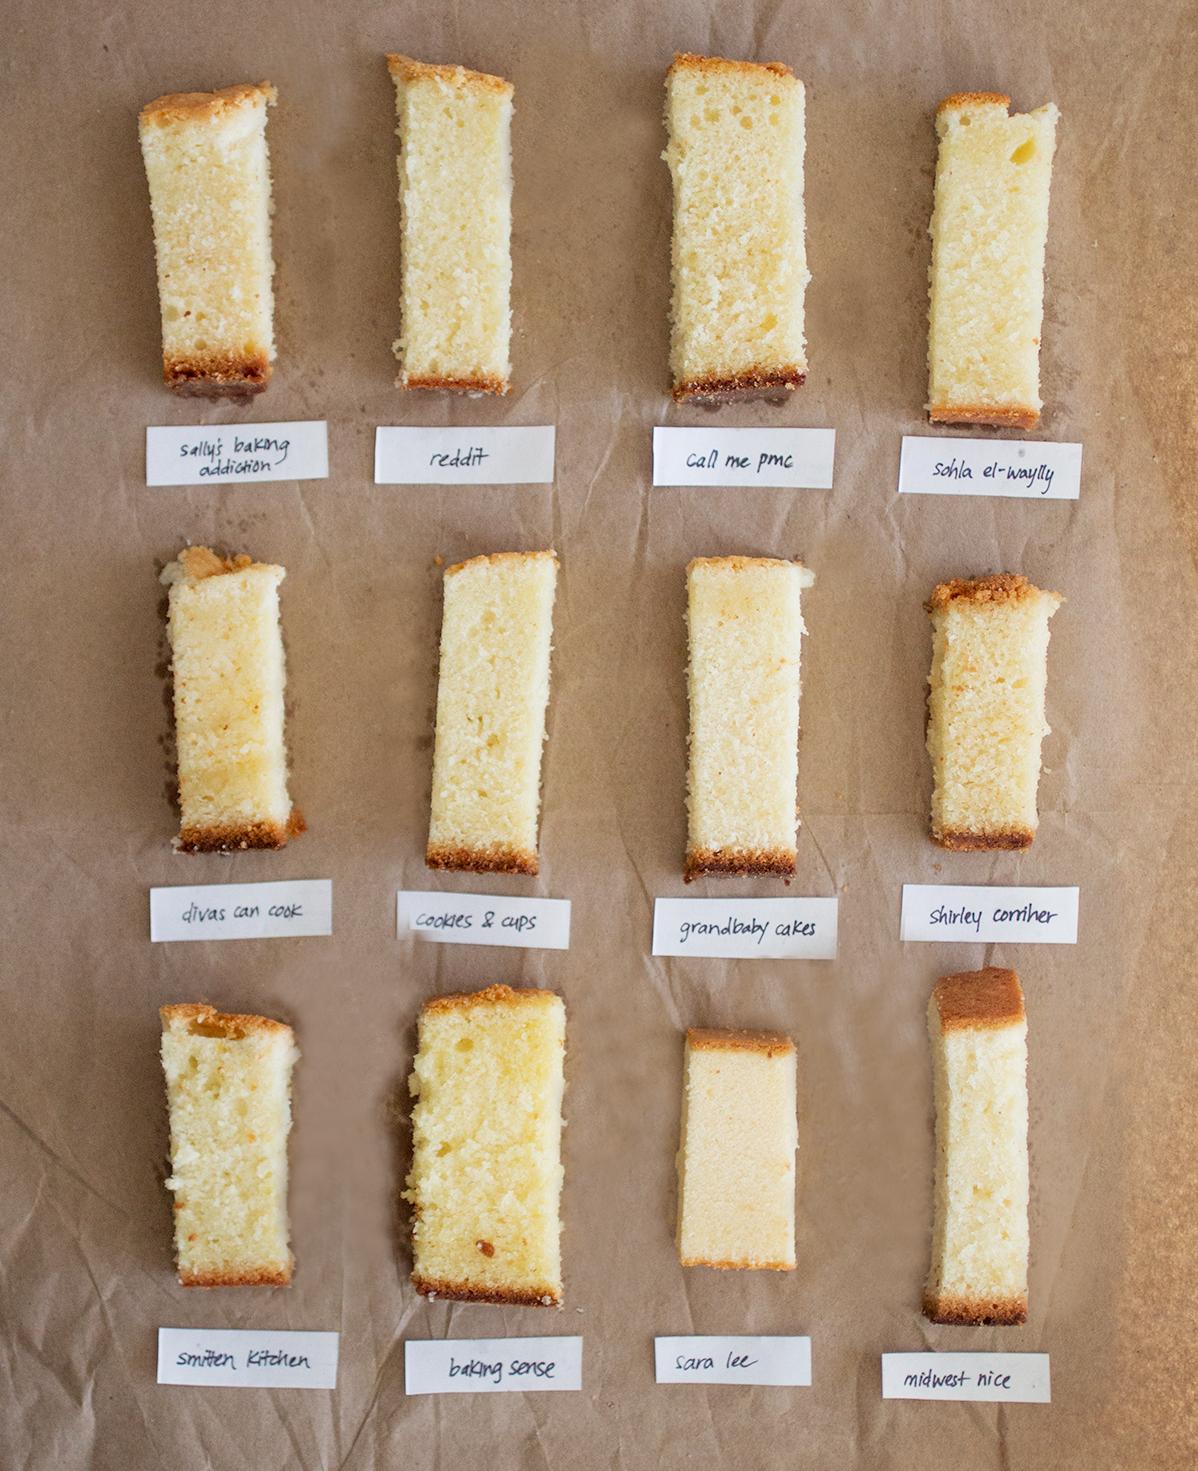  The creamy buttery texture of this cake will melt in your mouth and leave you wanting more.